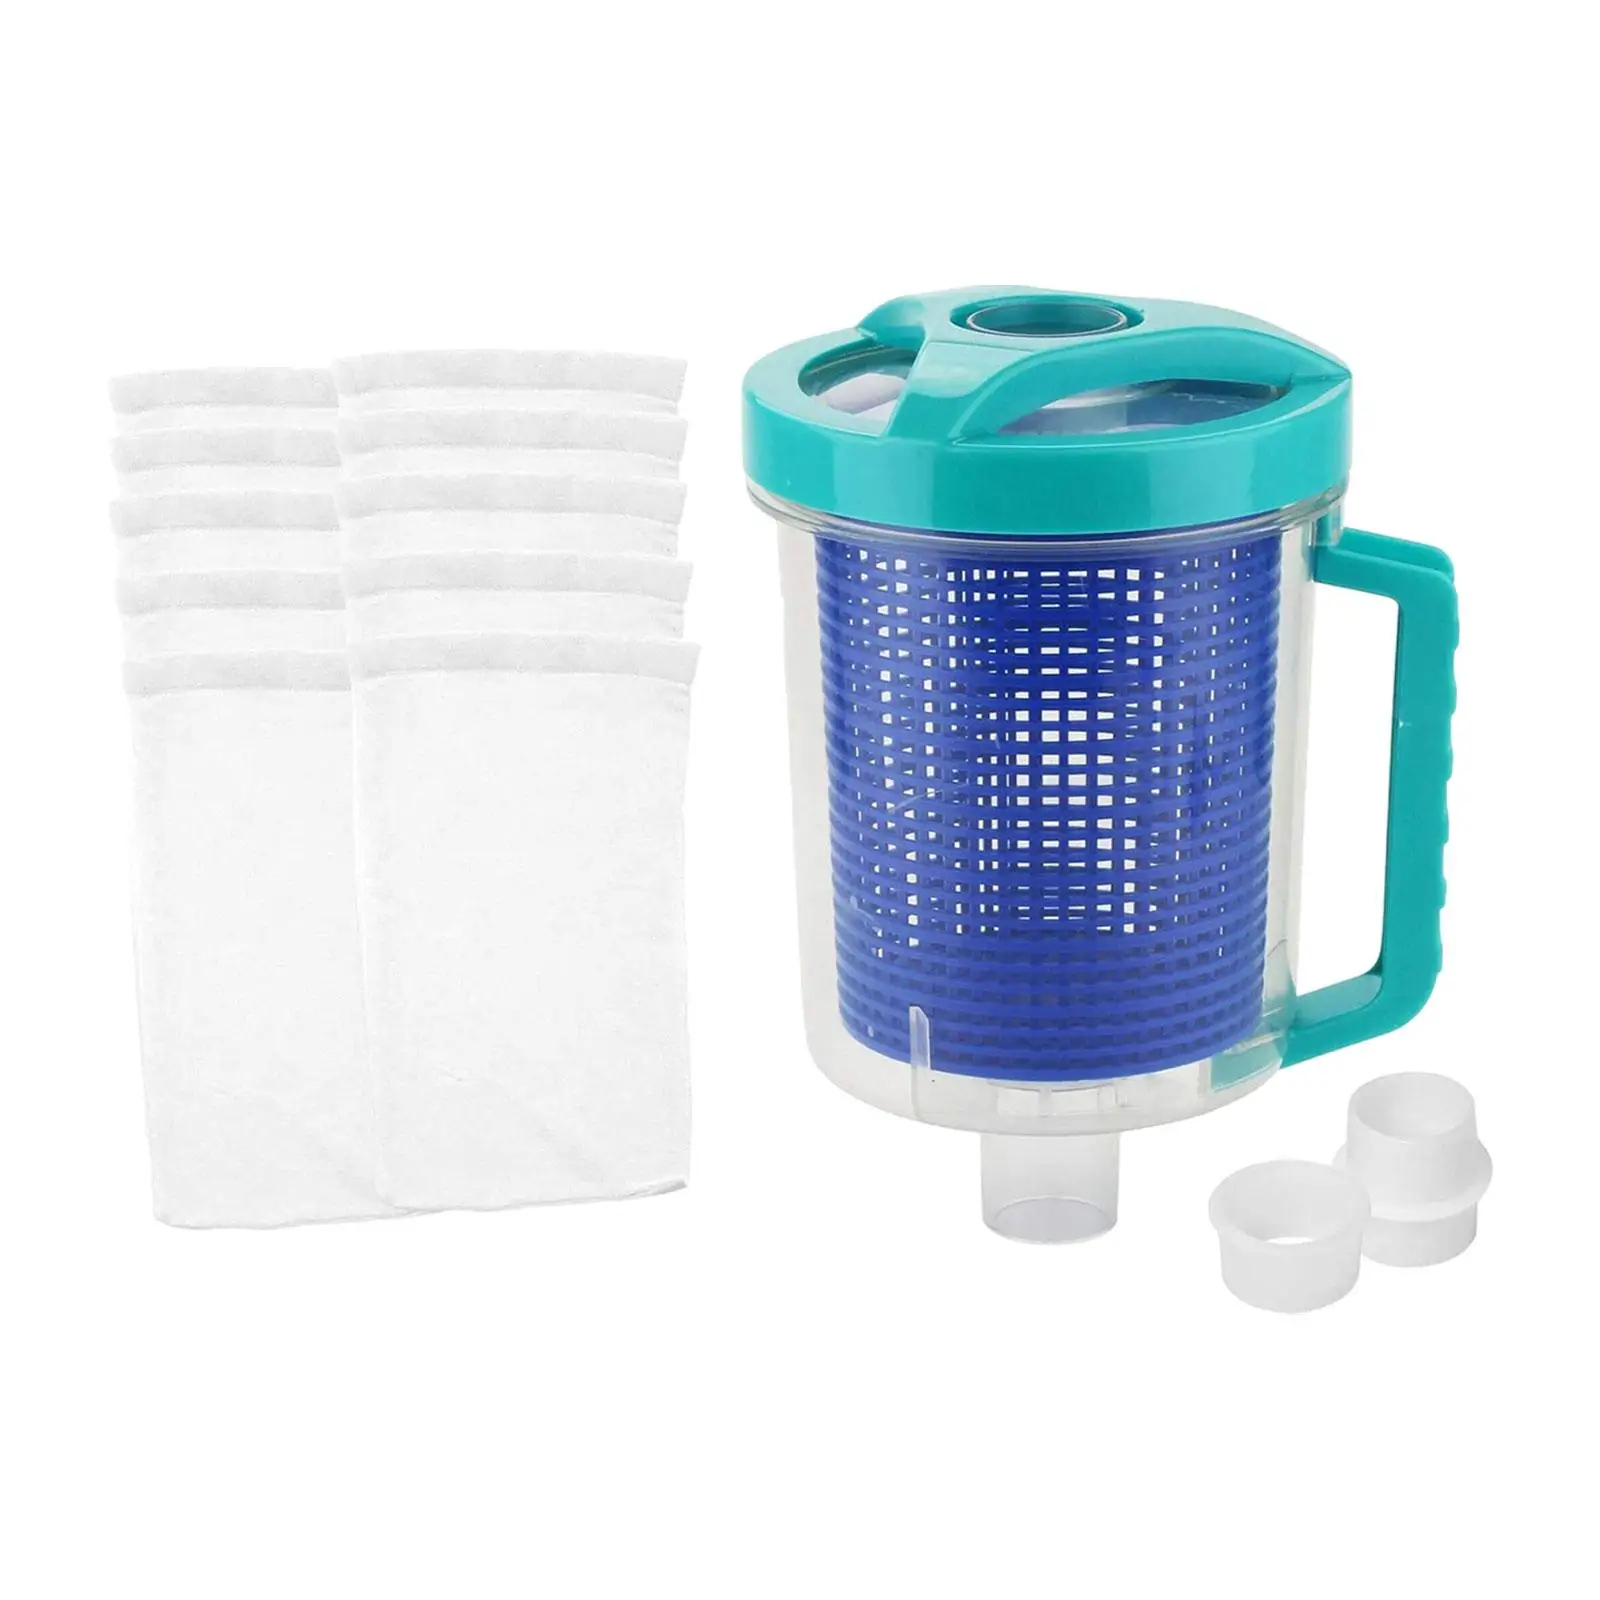 

Pool Leaf Canister Easy to Use Mesh Basket Sturdy with Skimmer Socks Professional for Pool SPA Pool Vacuum Swimming Pool Cleaner